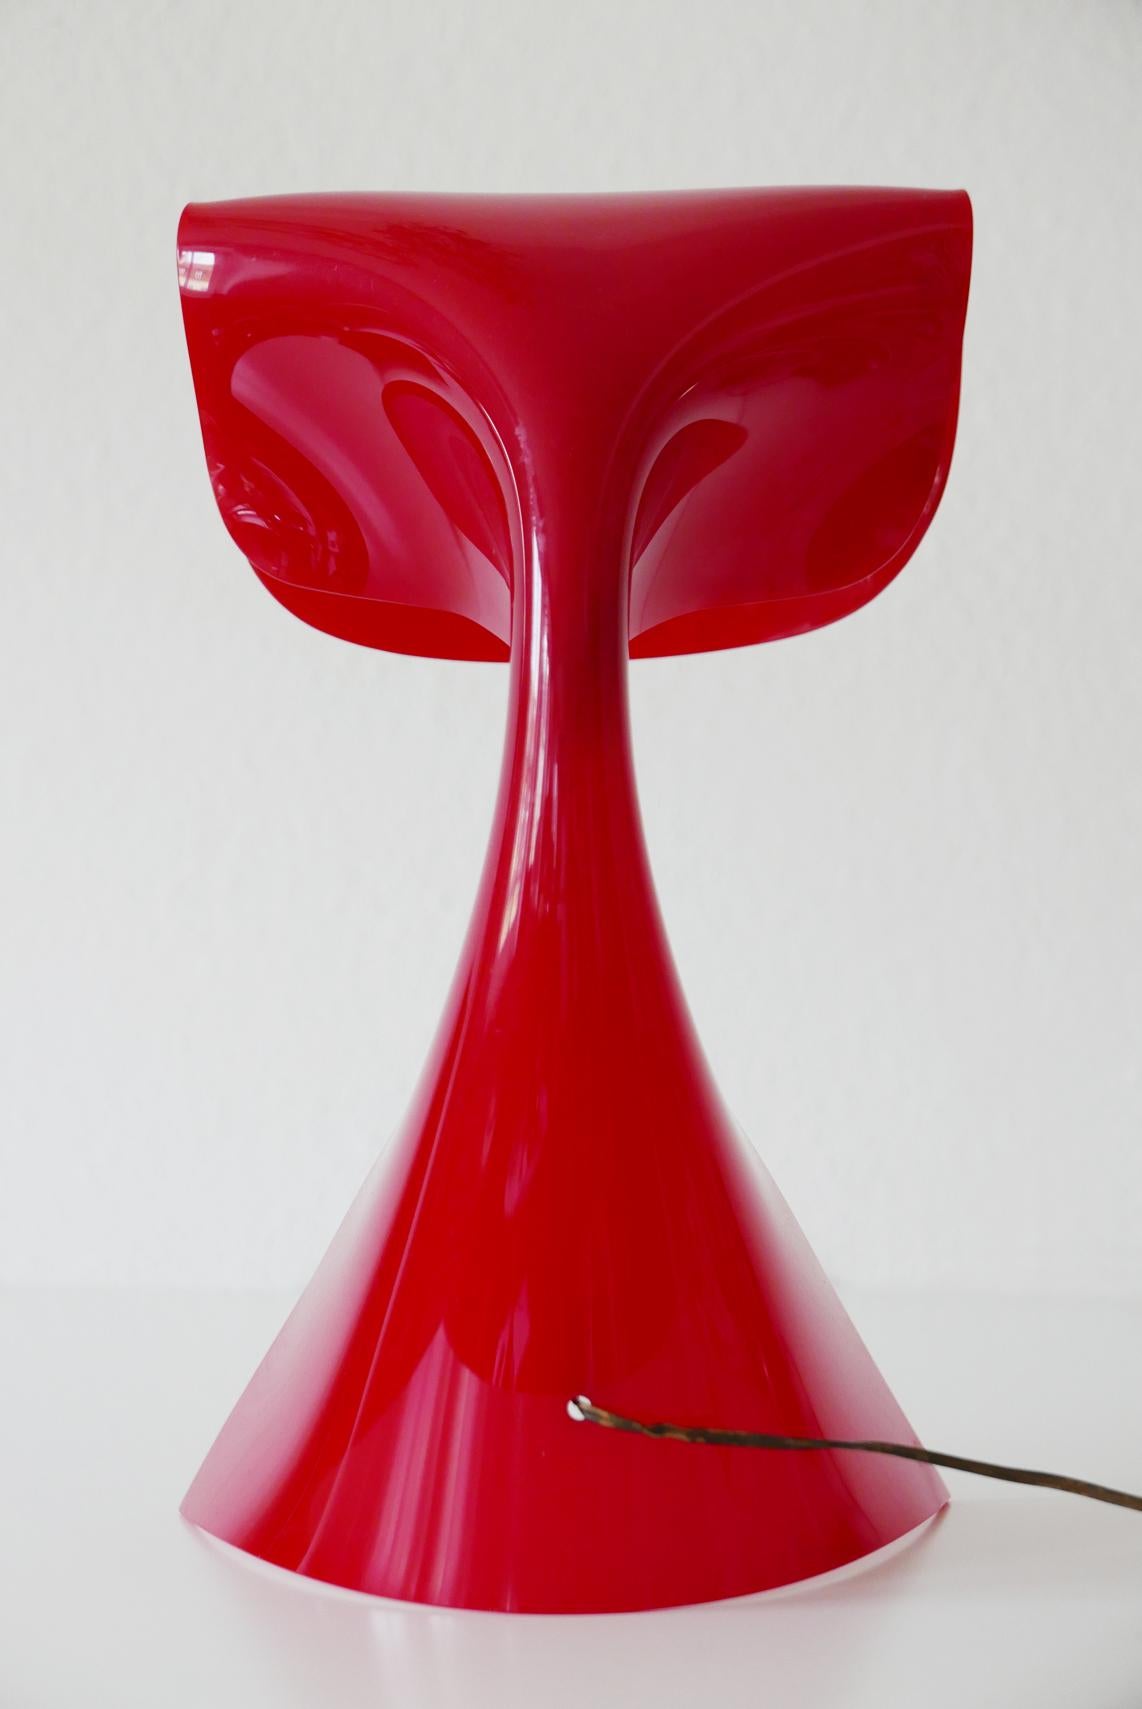 Exceptional Table Lamp by Hanns Hoffmann-Lederer for Heinz Hecht, 1950s, Germany For Sale 8